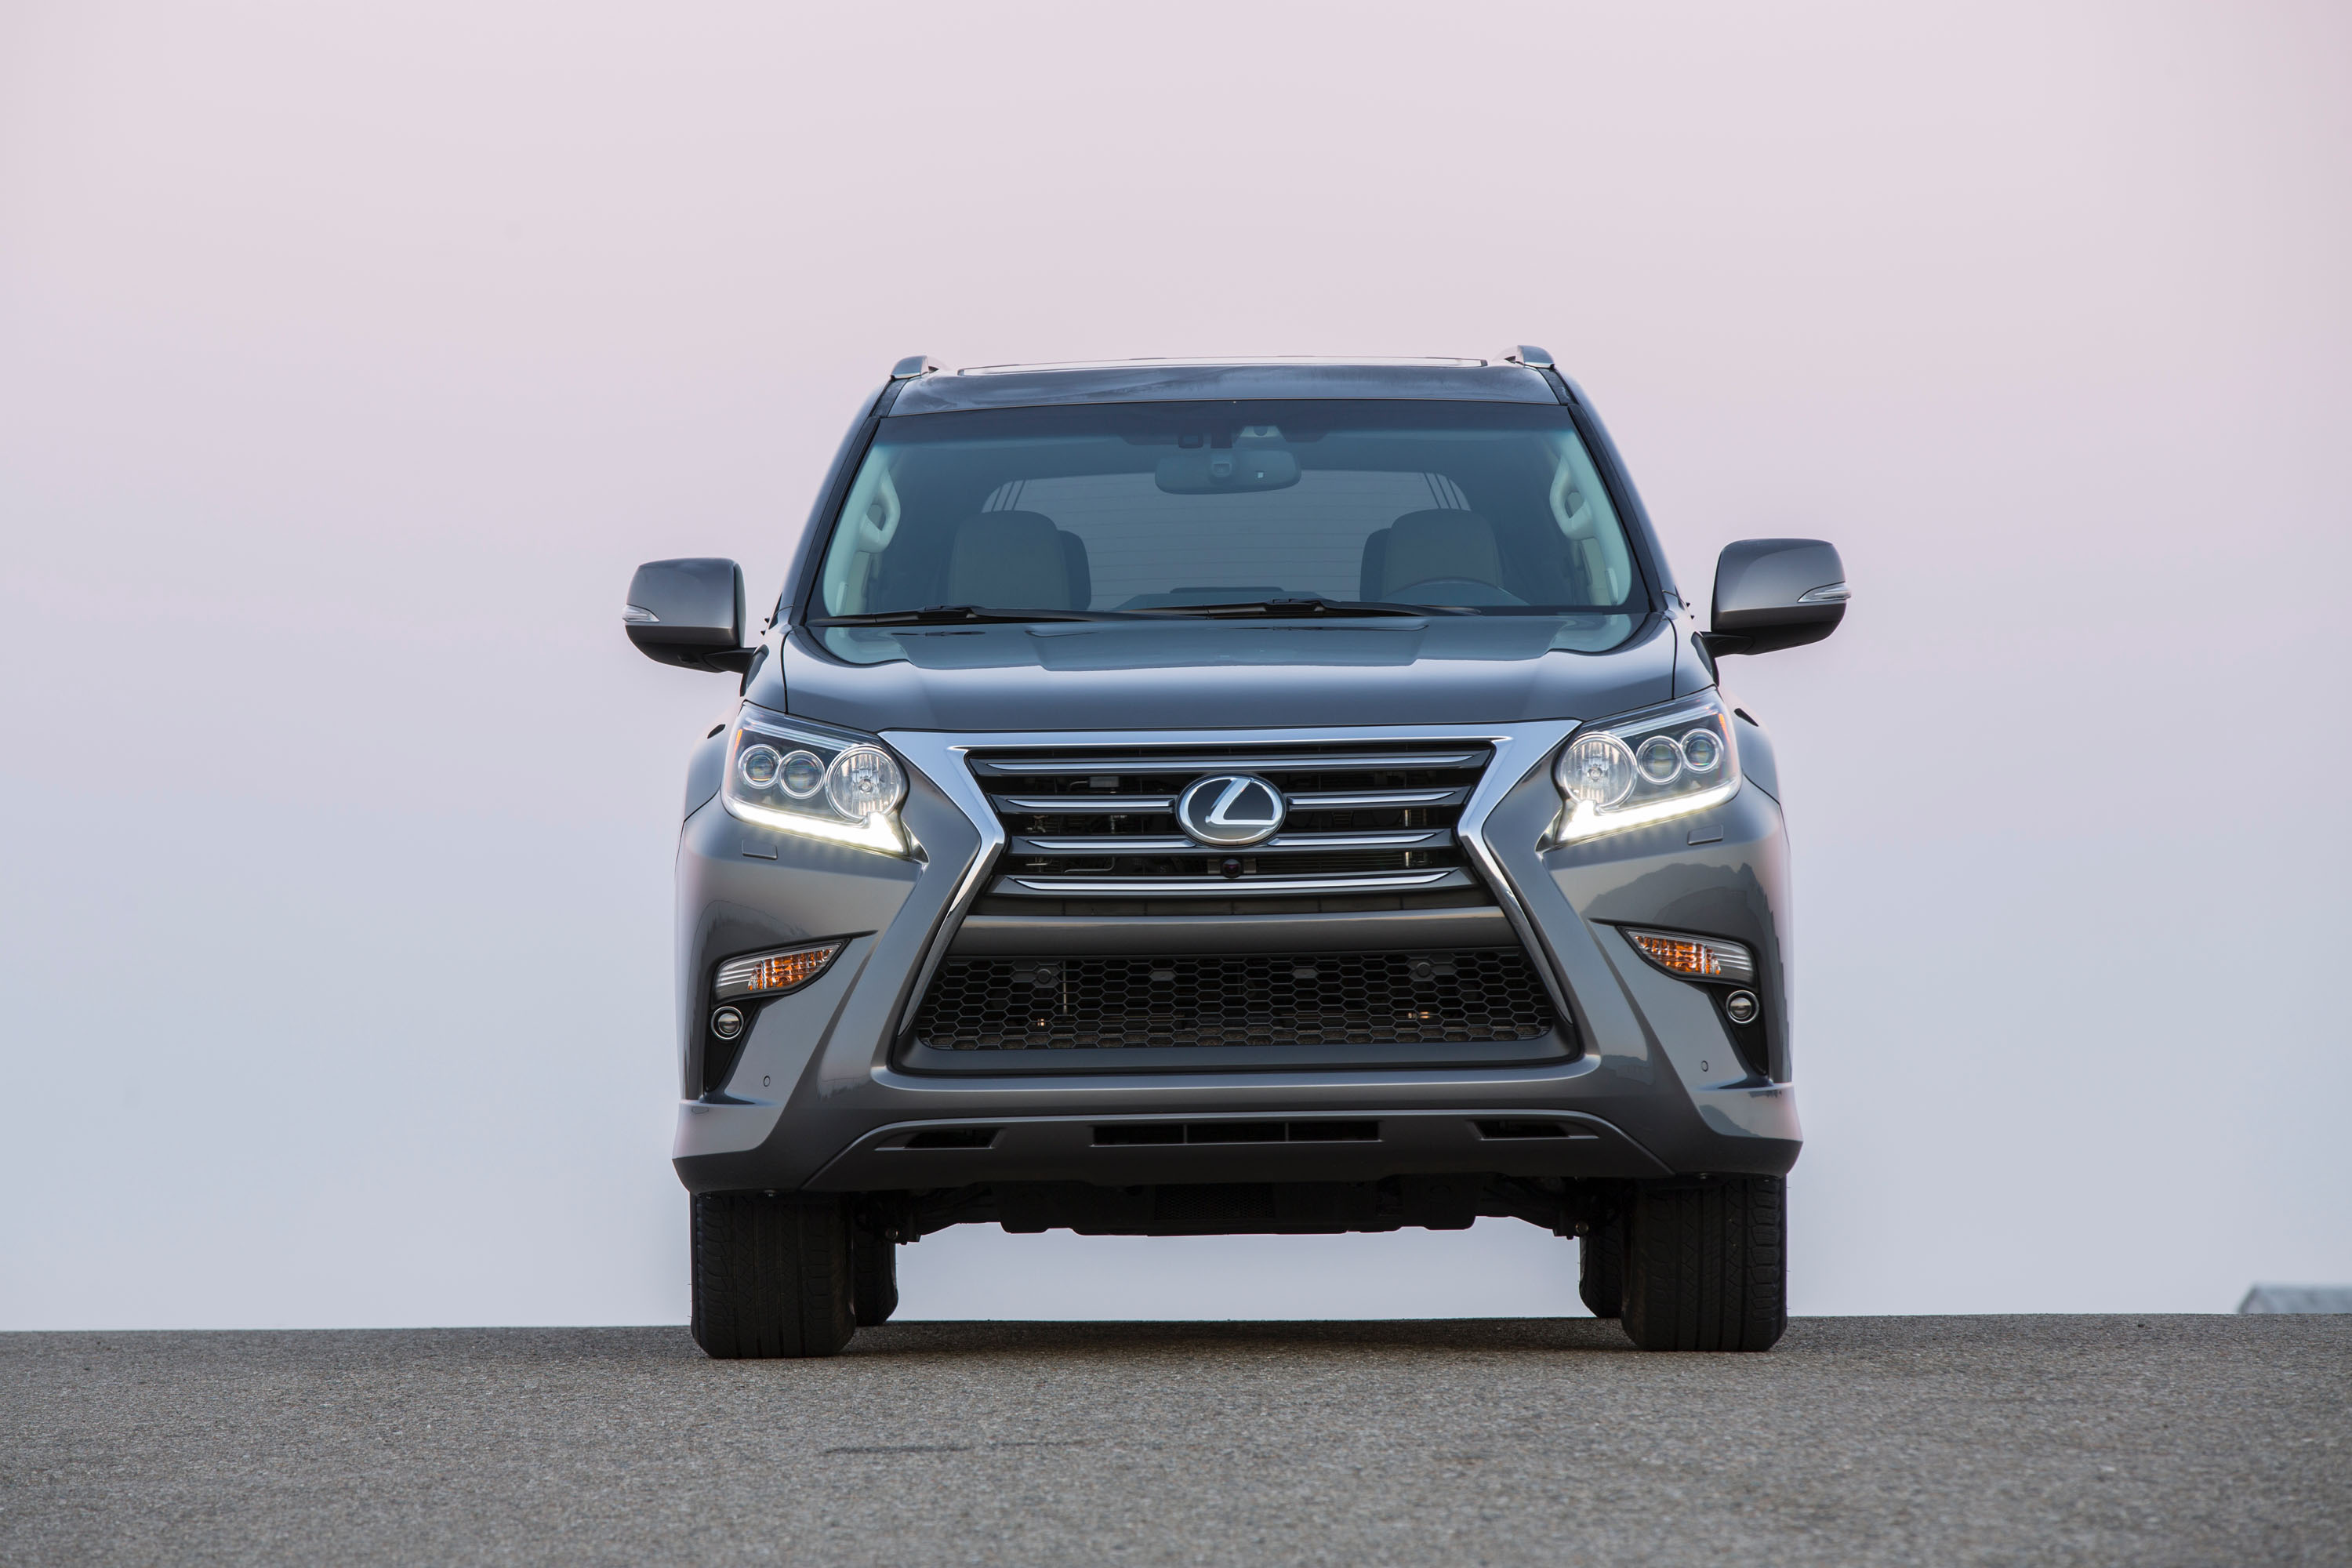 2015 Lexus GX 460 Works for the Week but Lives for the Weekends - Lexus USA  Newsroom